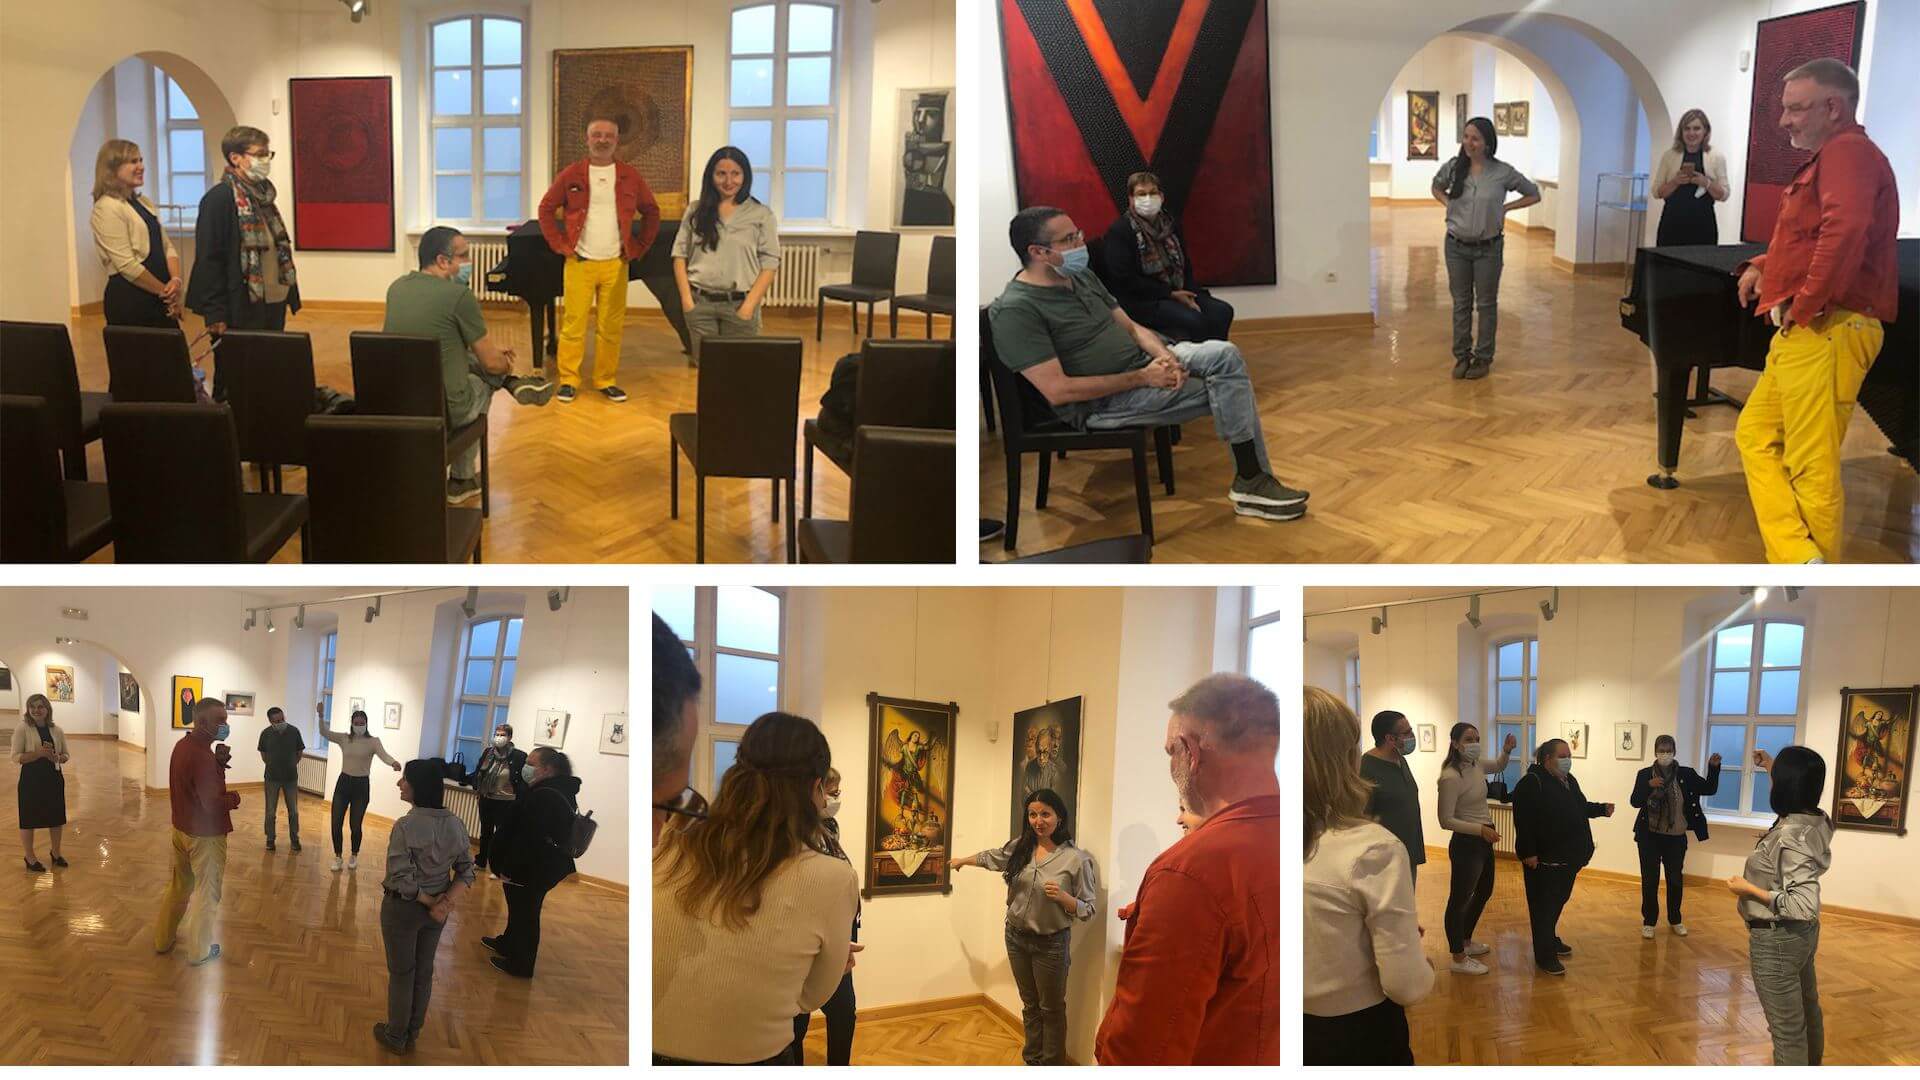 Serbian Language and Culture workshop at a Gallery